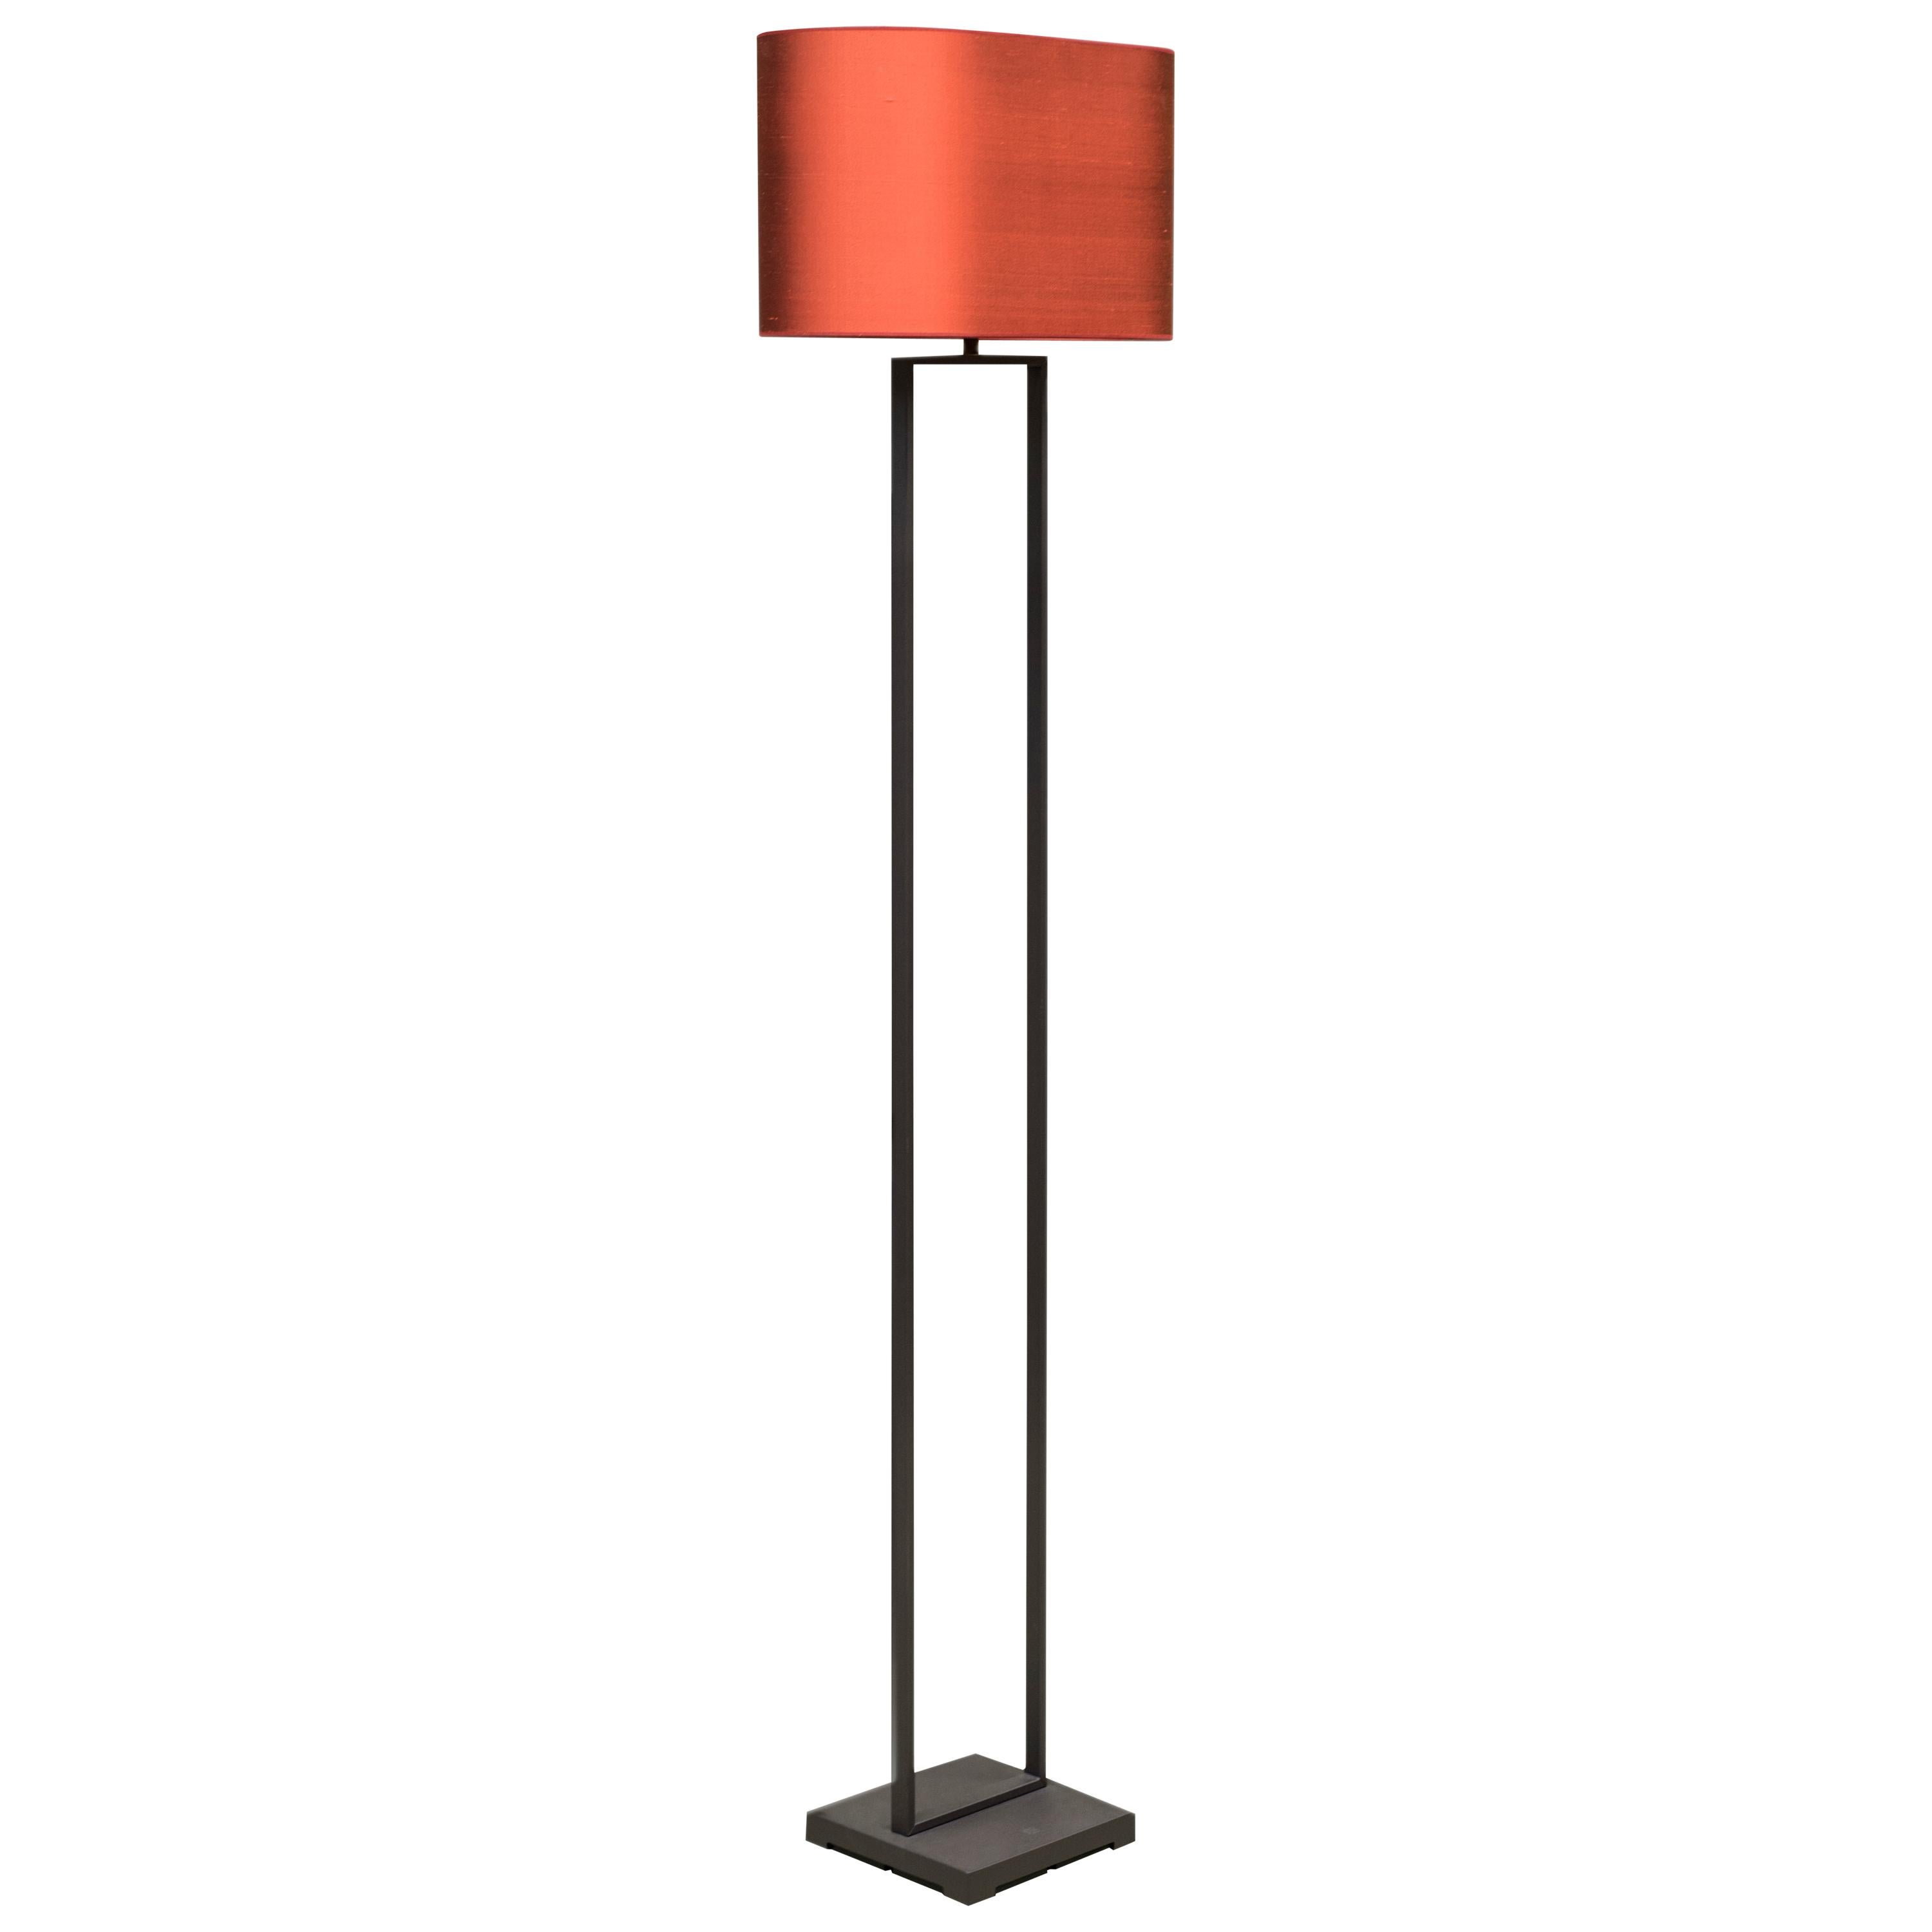 Peter Ghyczy Floor Lamp Urban Lotis 'MW24' Ristretto / Silk Red